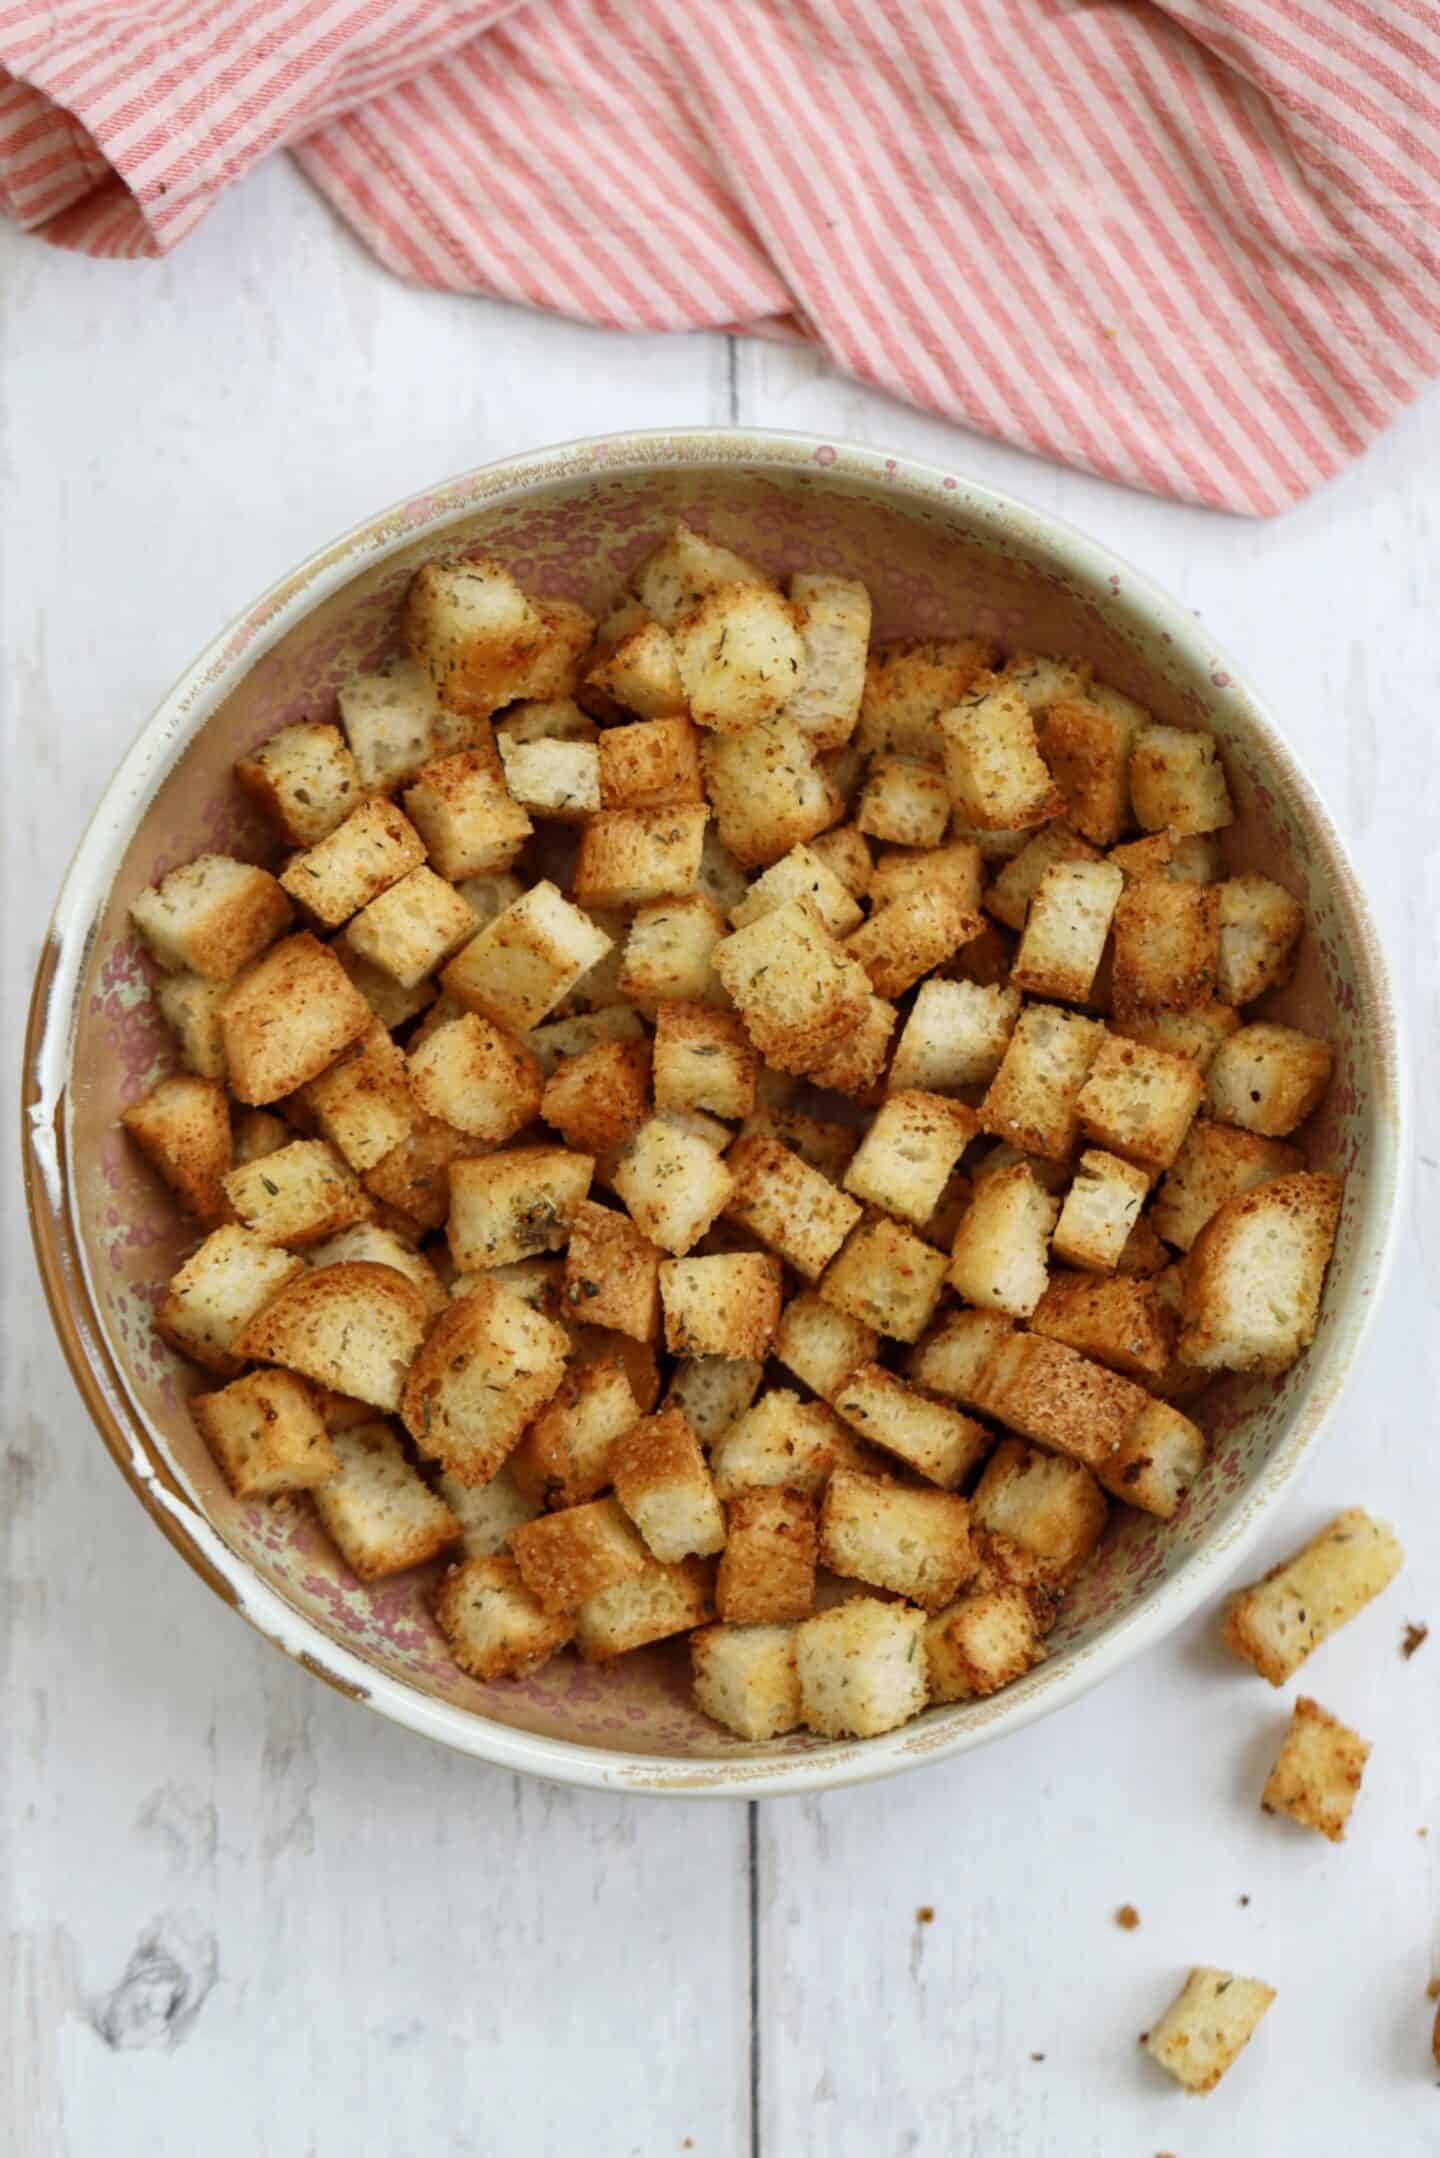 A bowl of gluten free croutons.